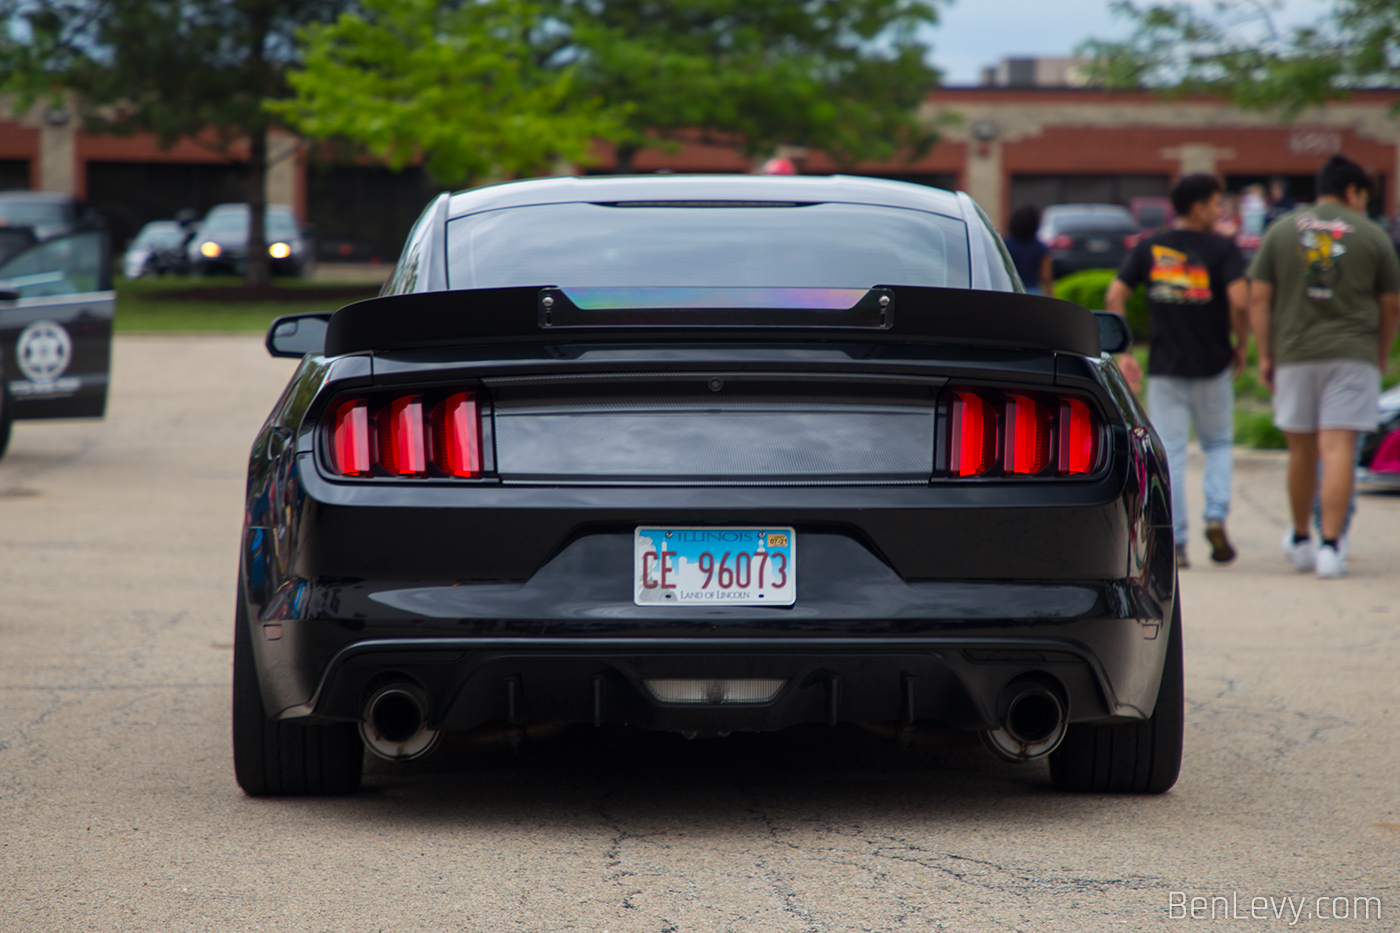 Black S550 Mustang with Custom Rear Pieces